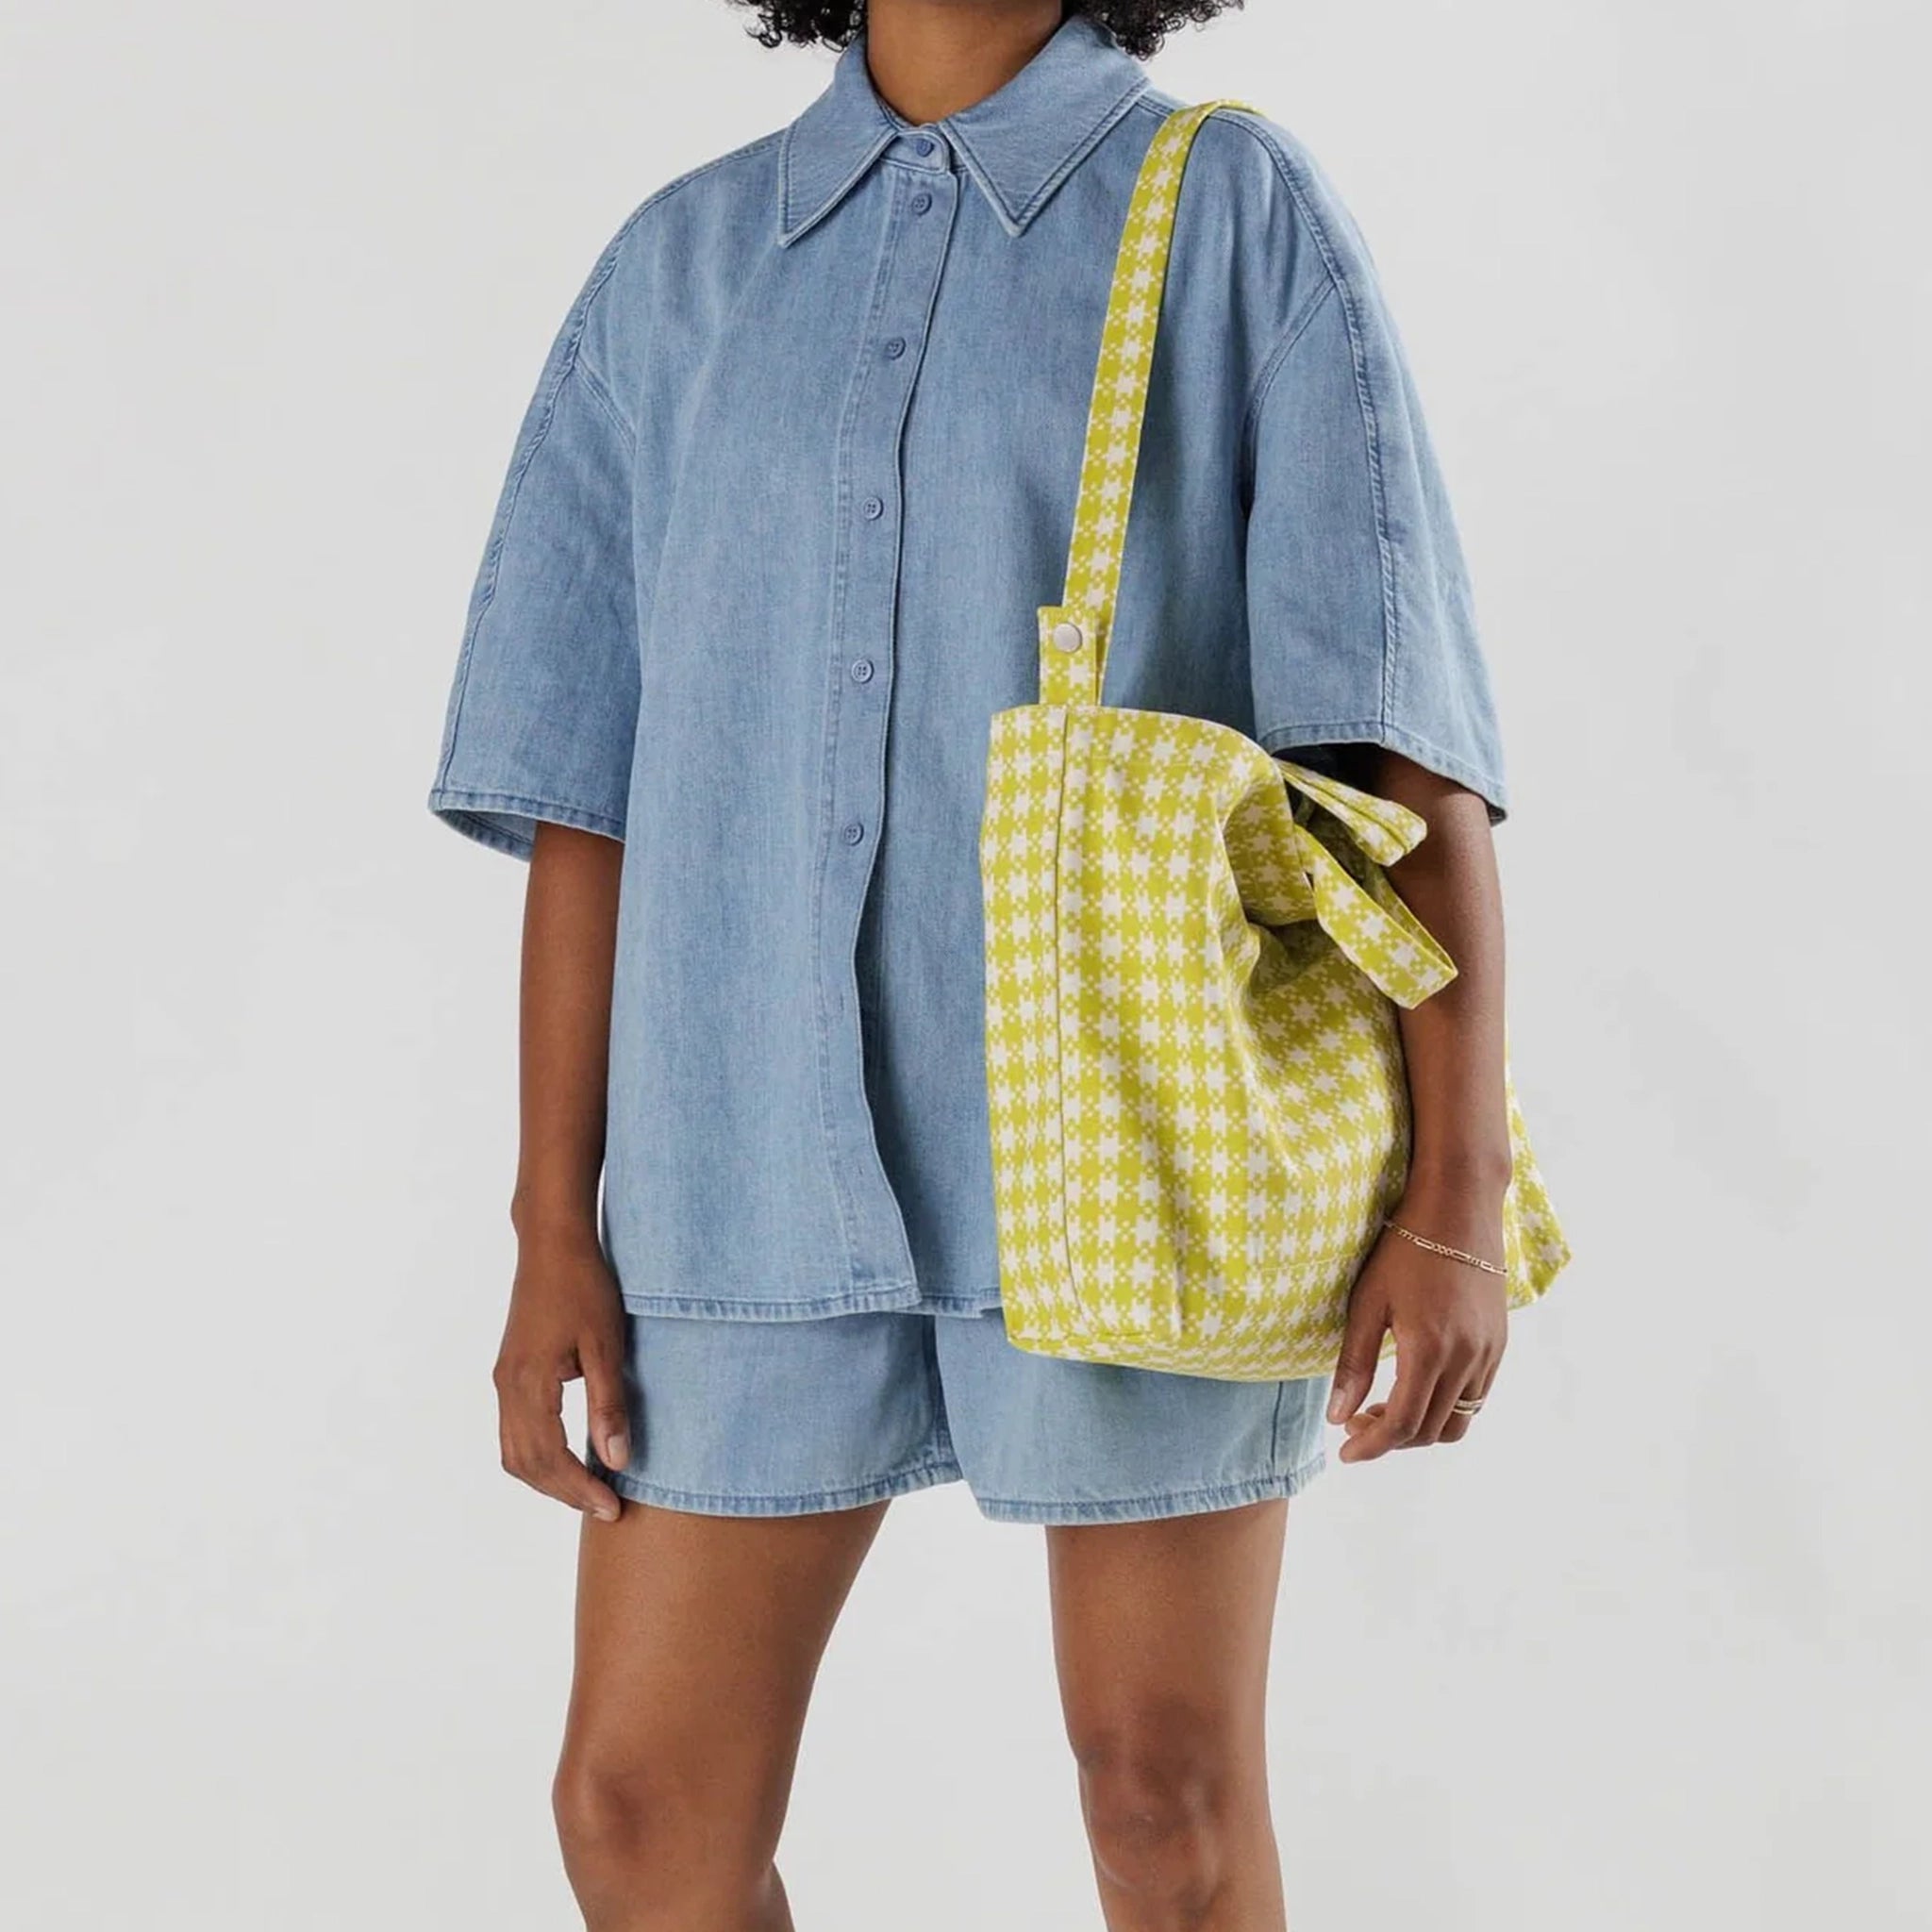 On a grey background is a model wearing a neon green pixel gingham print tote bag with a shoulder strap and hand straps .